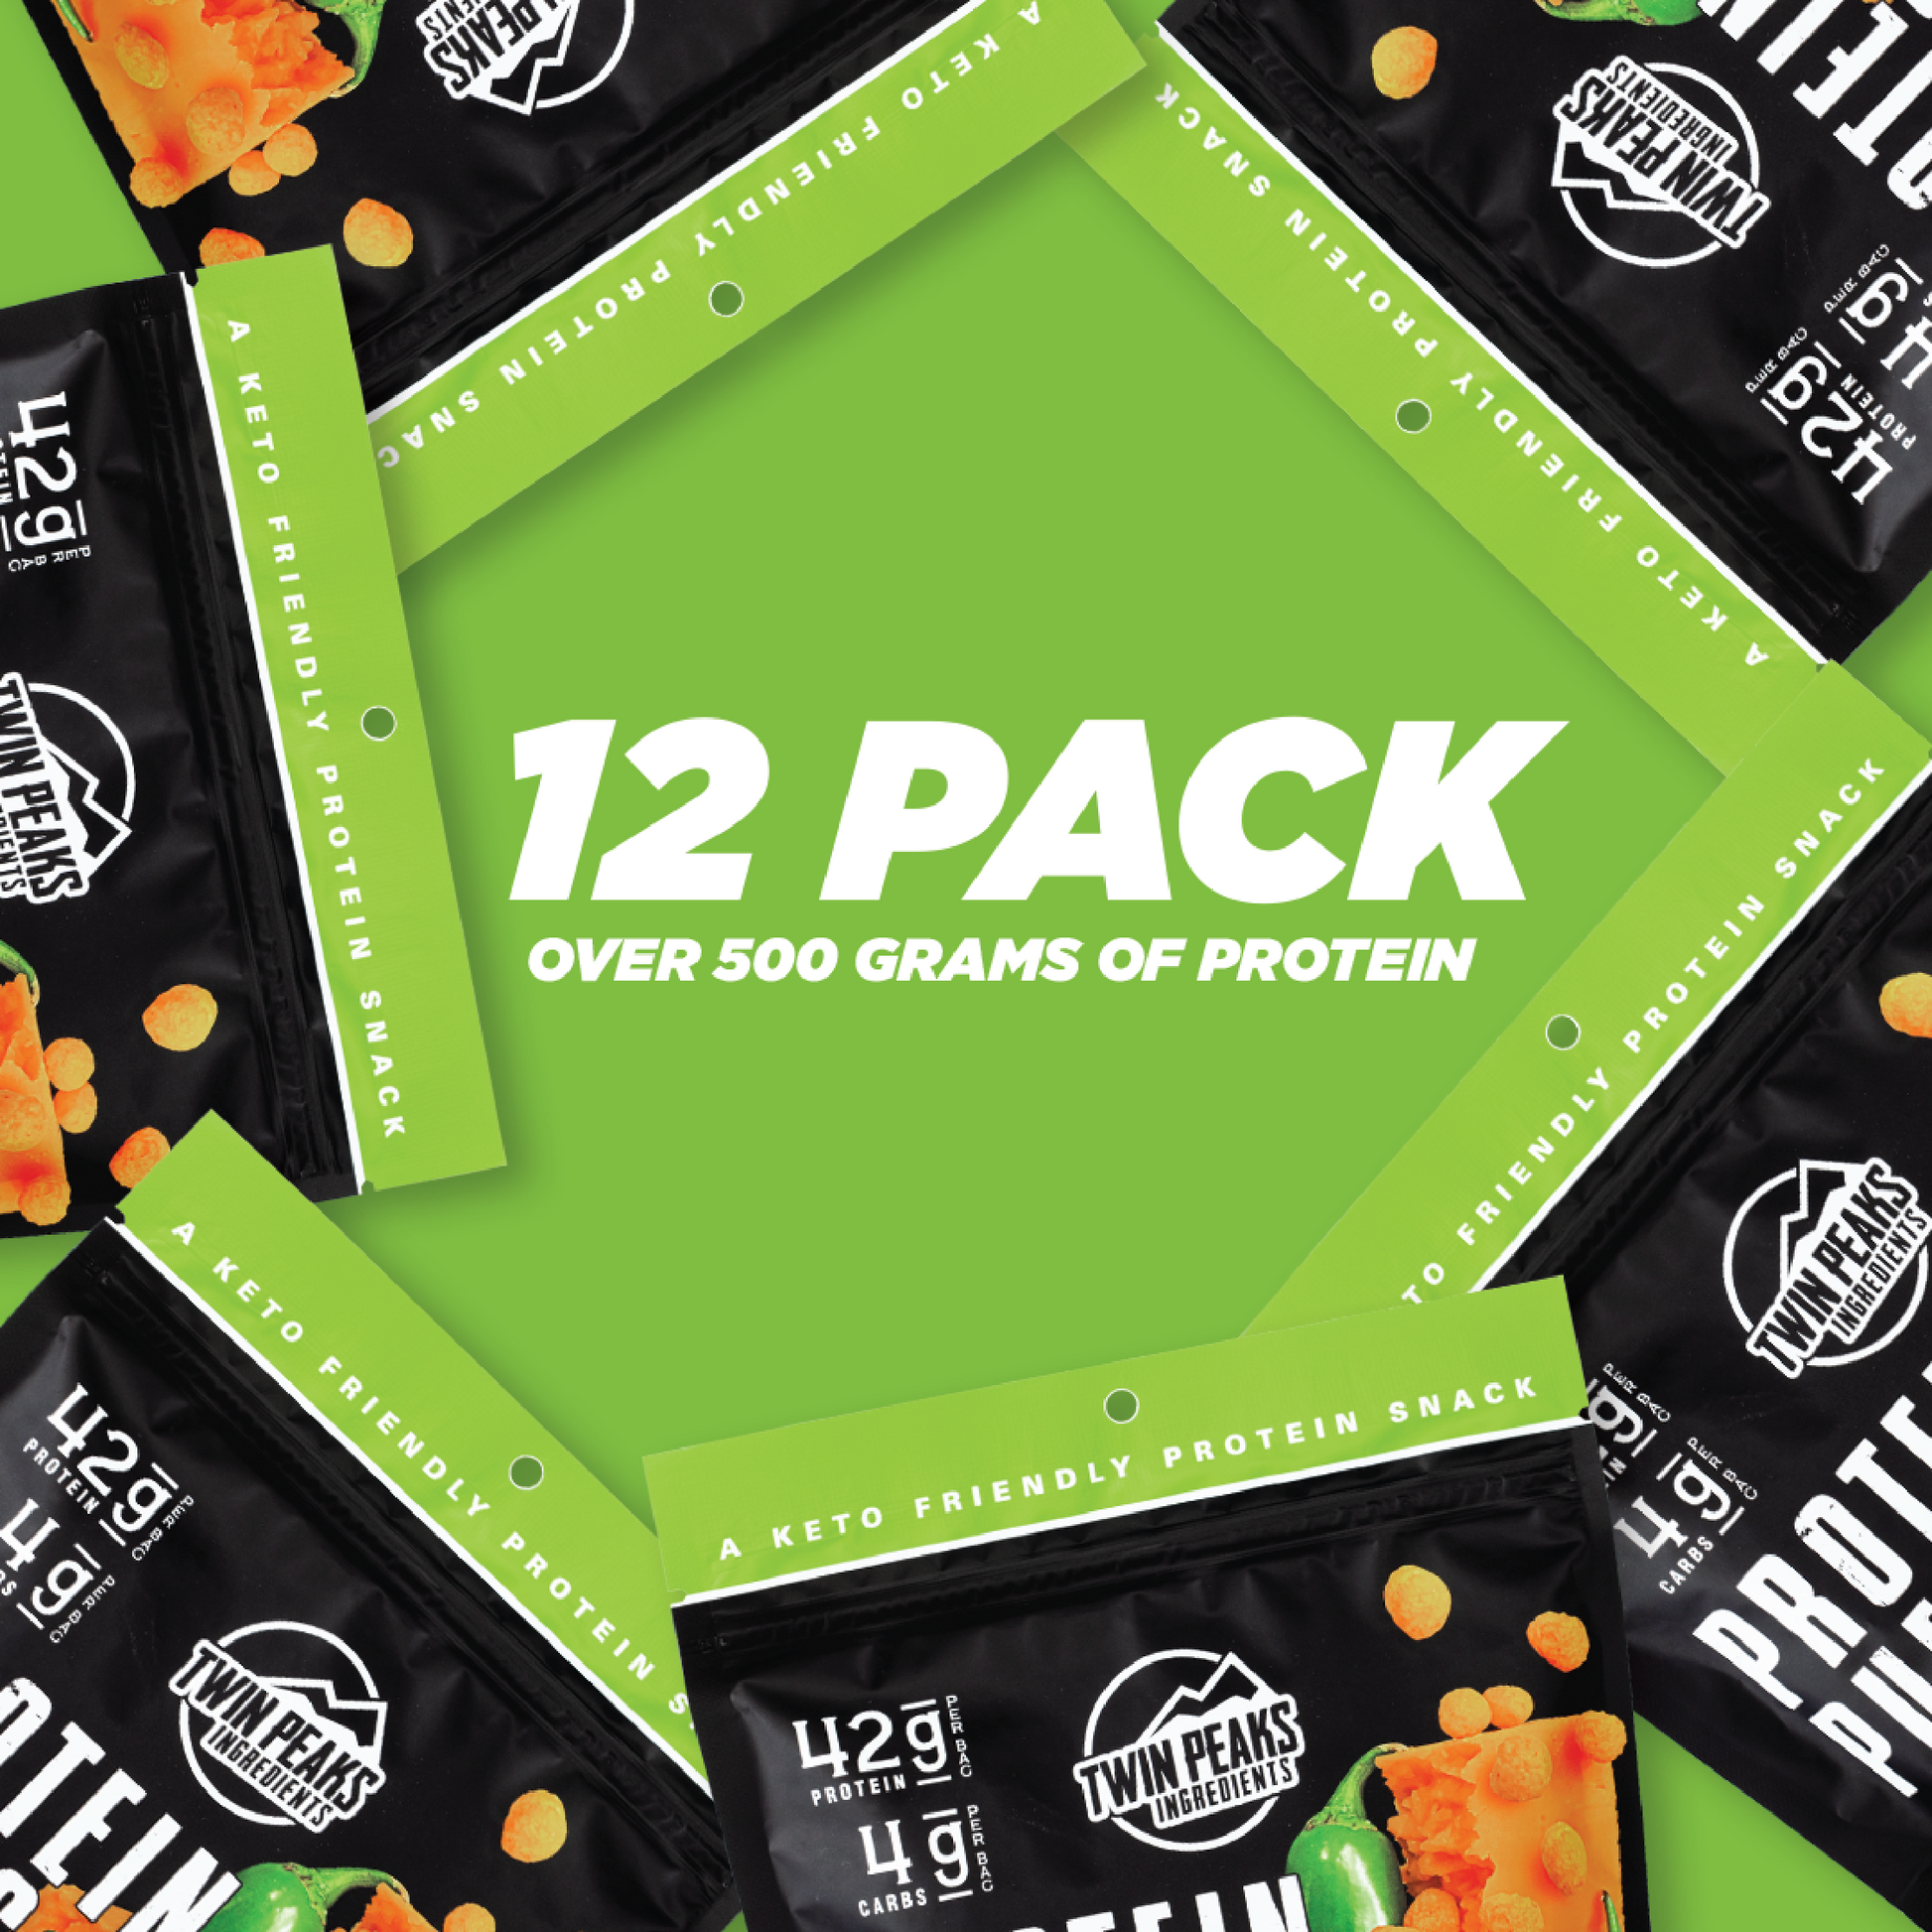 12 Pack - Over 500 Grams Of Protein